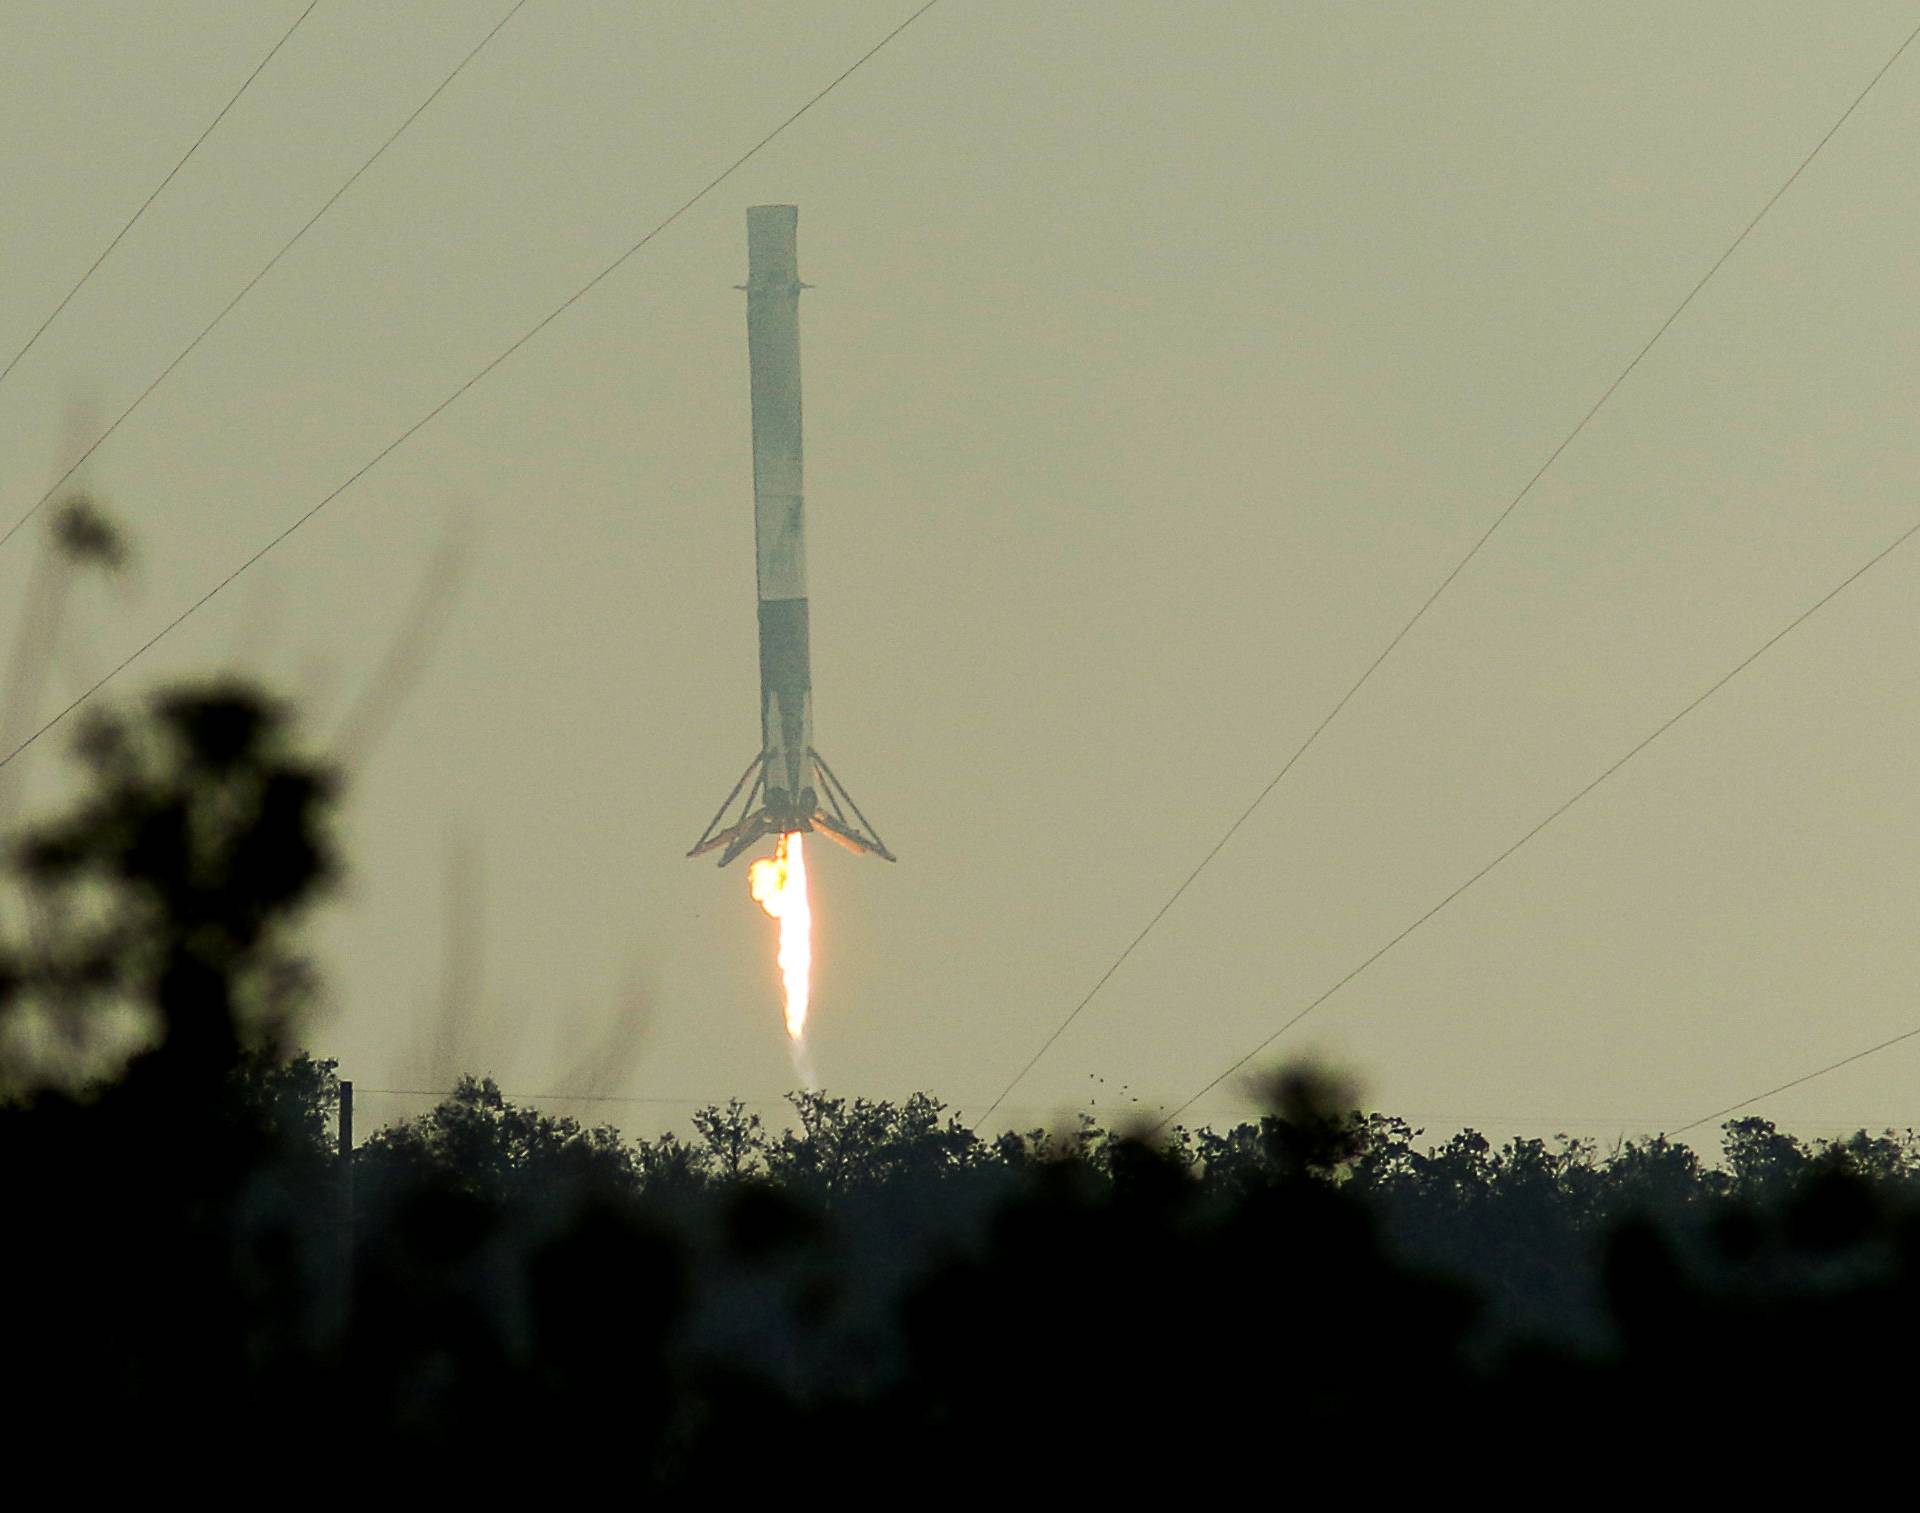 A SpaceX Falcon 9 rocket first stage returns to land at the Cape Canaveral Air Force Station in Cape Canaveral